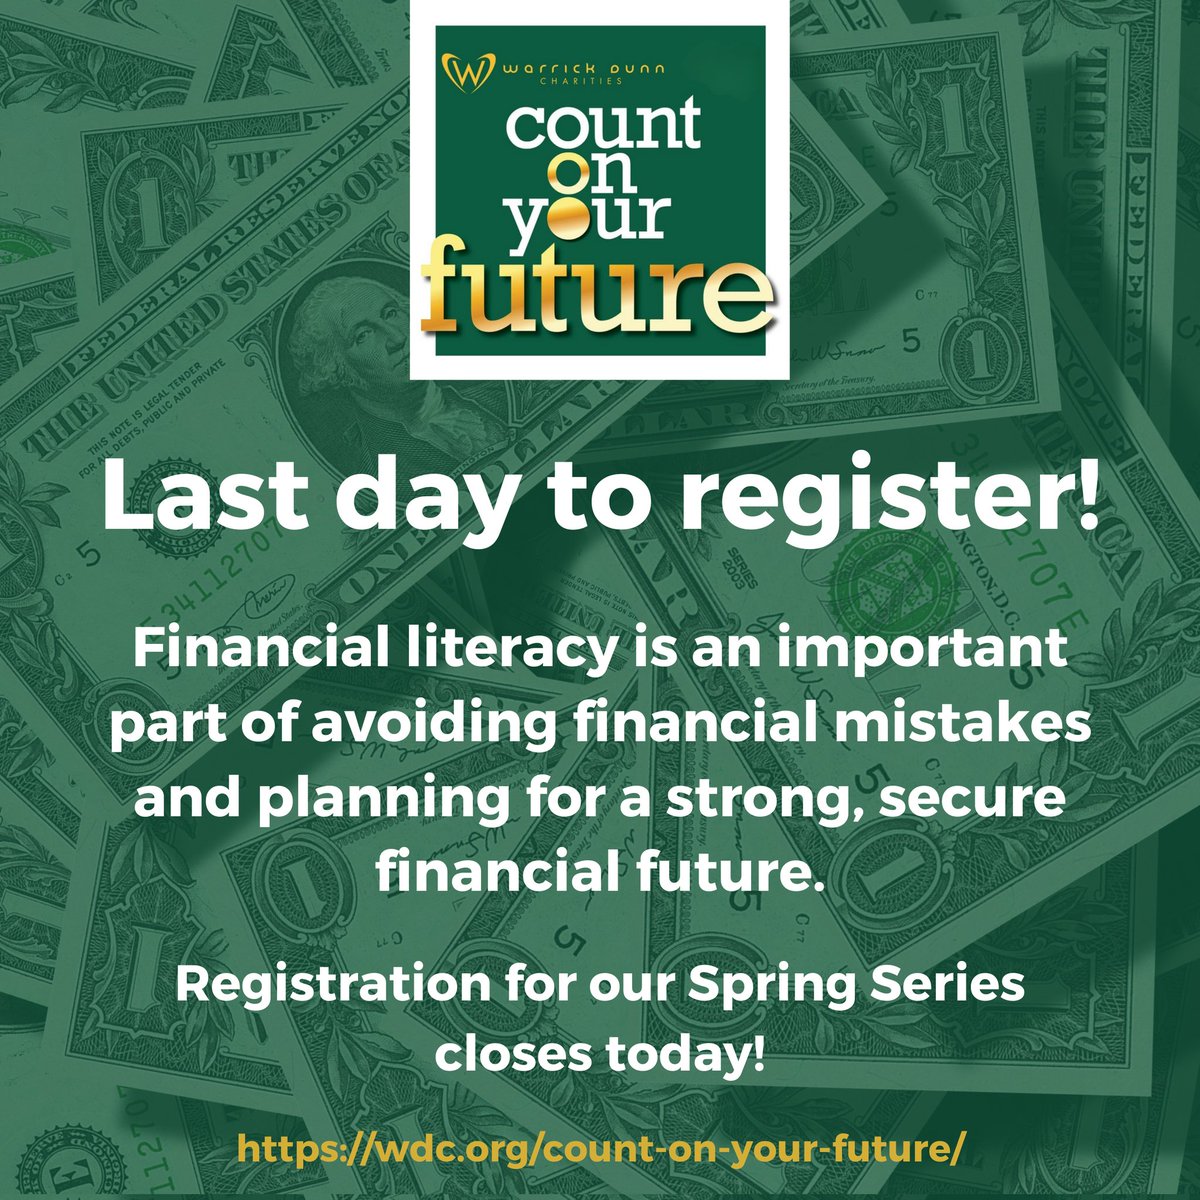 Today is the last chance to level up your financial game! Don't miss out on registering for our financial literacy course before it's too late! 💰 wdc.org #financialliteracy #lastday #dontmissout #wdcharities #finances #money #budgeting #dunndidit #dunndeal